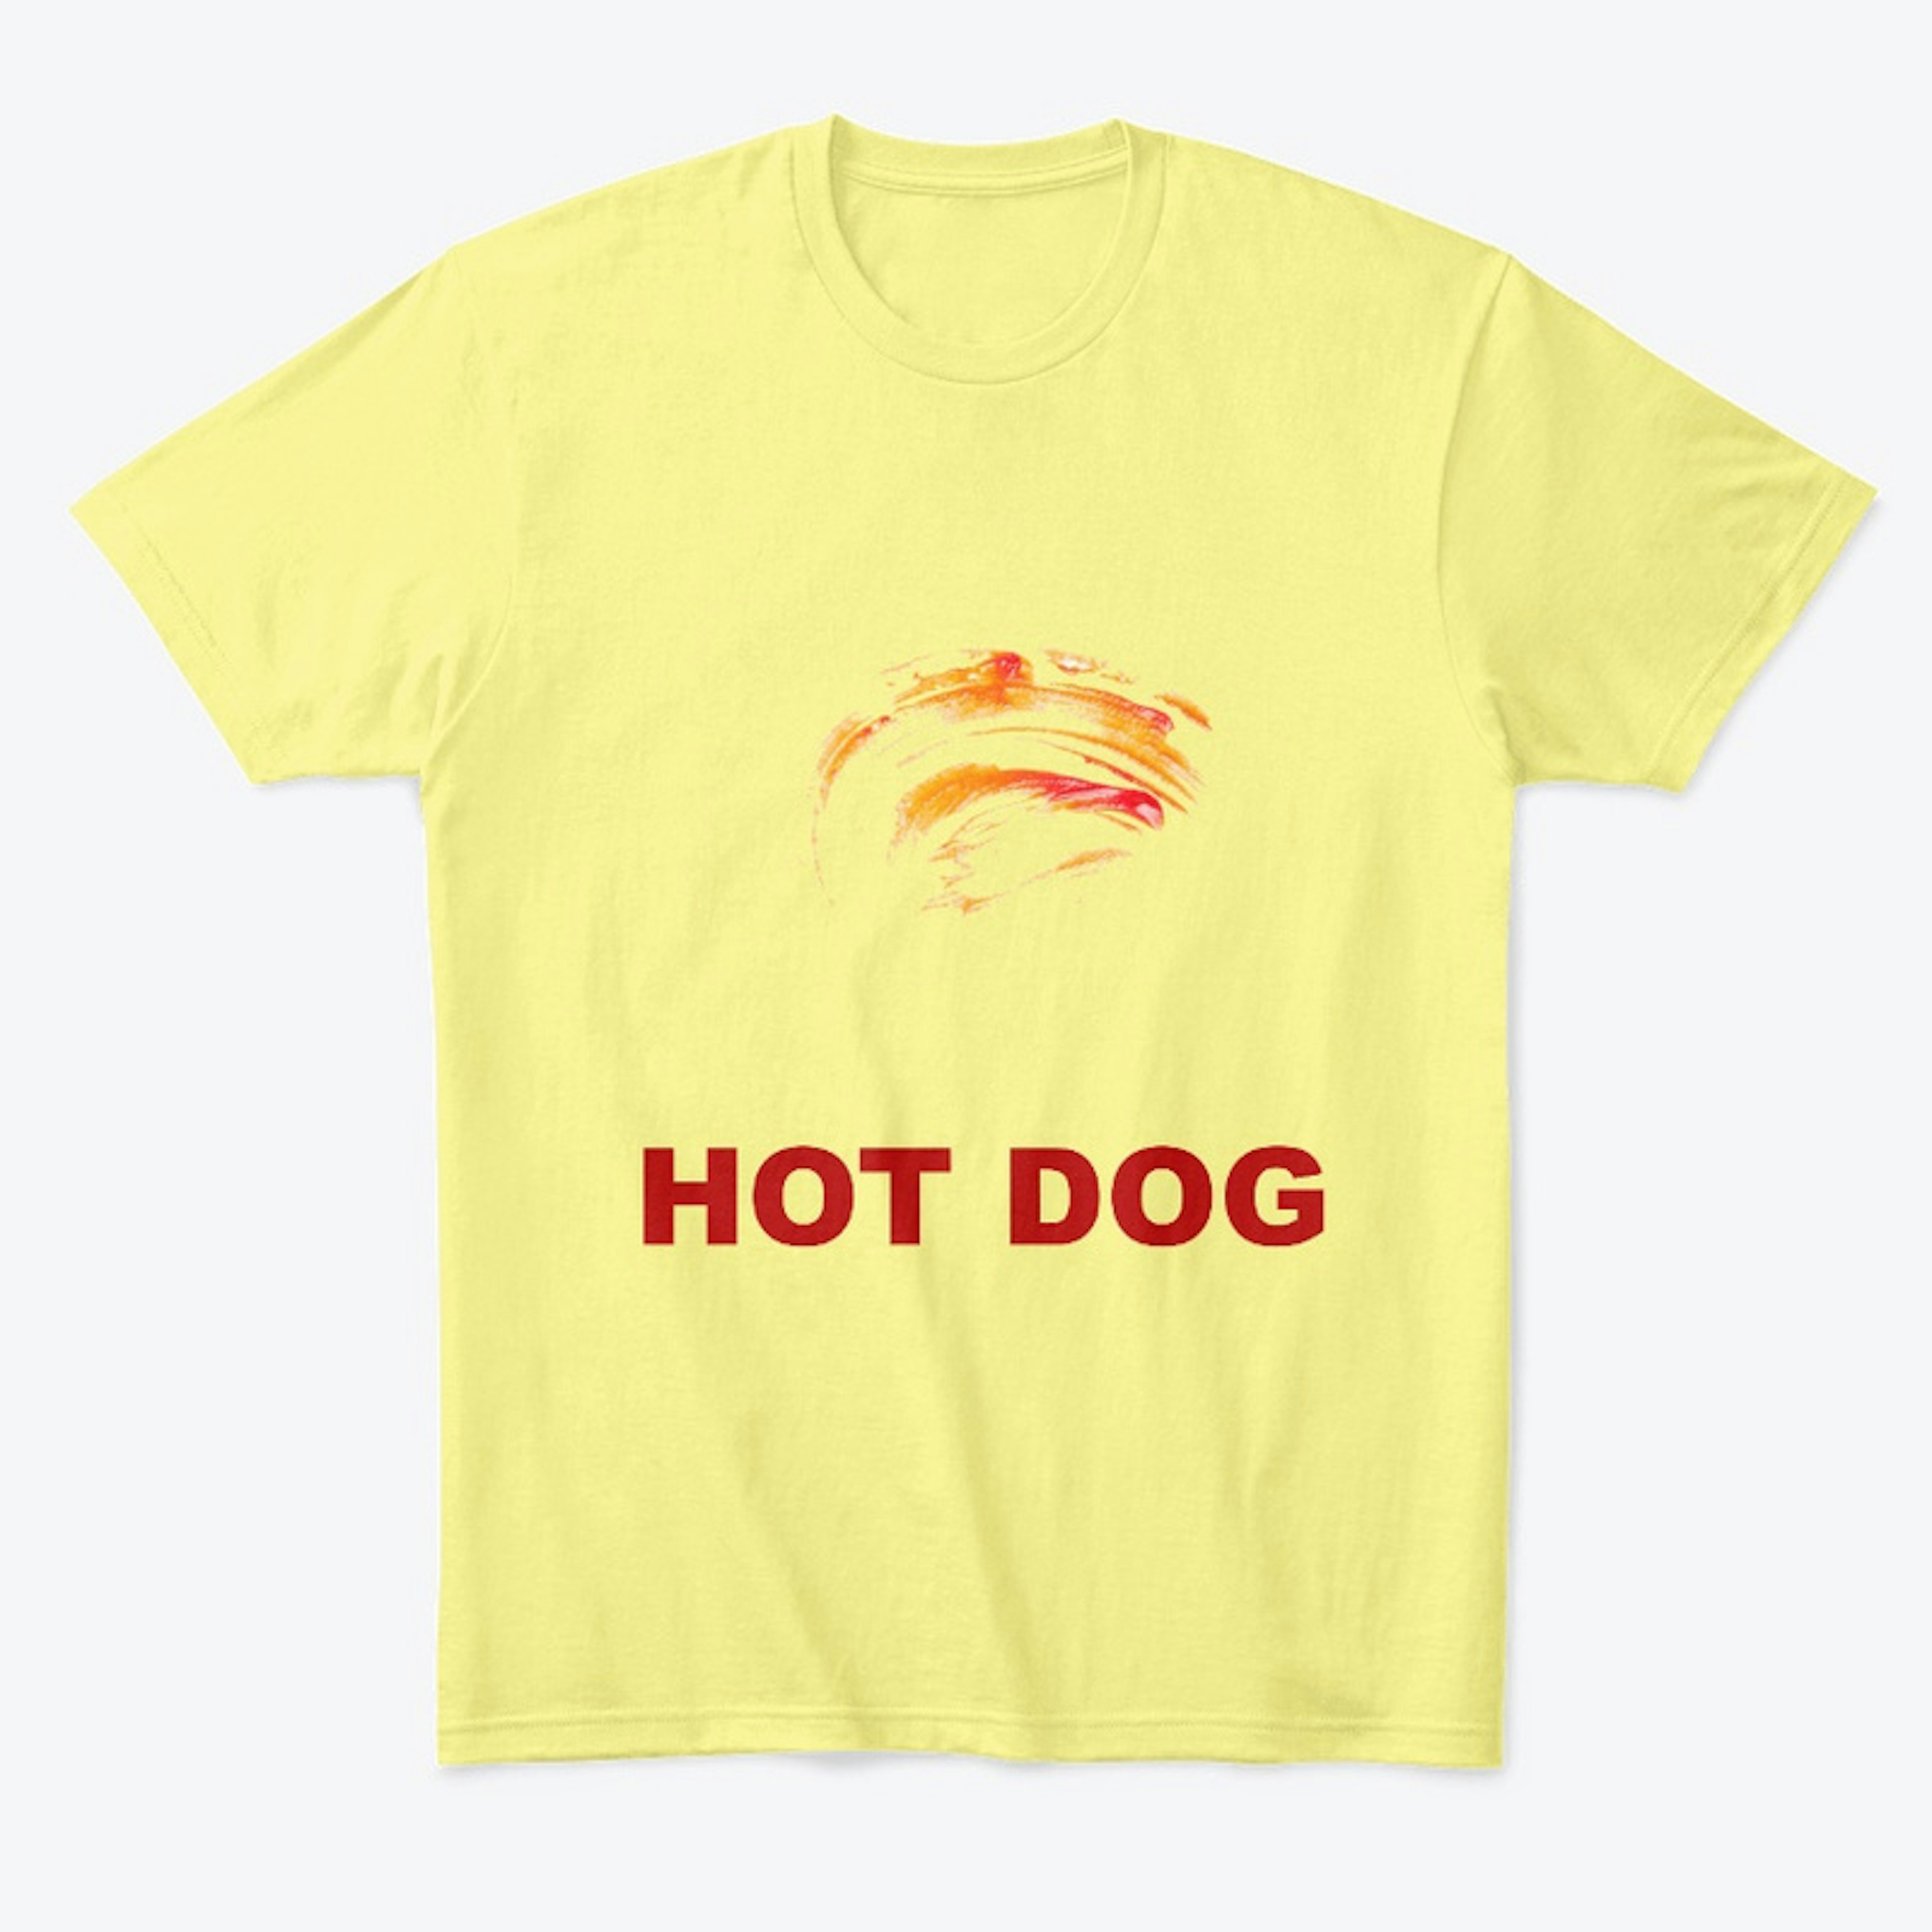 HOT DOG STAIN